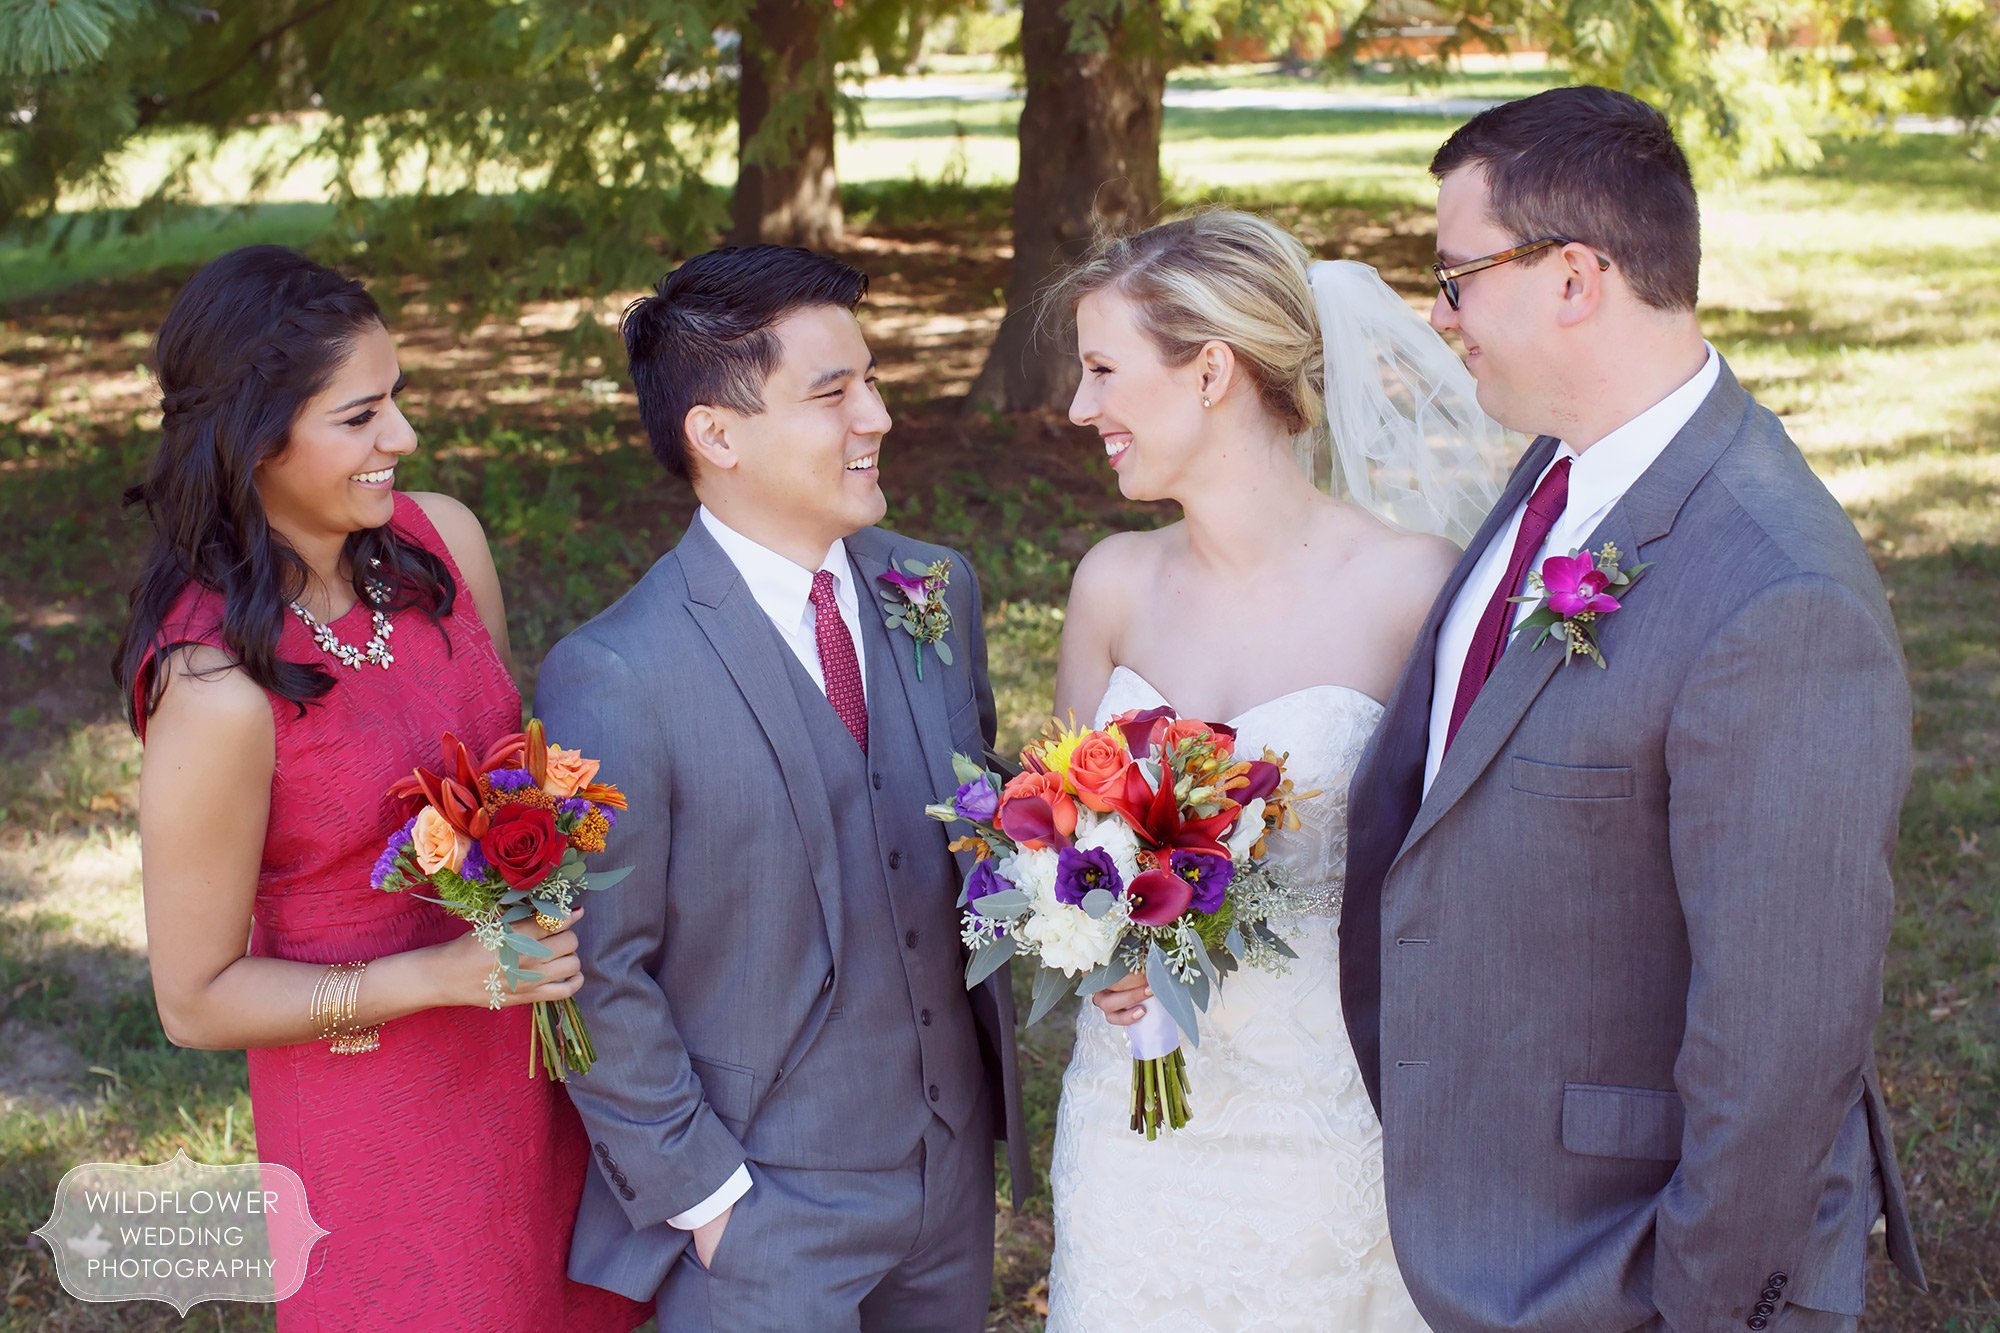 Small wedding party have a relaxed portrait at this St. Louis ceremony at the Priory.